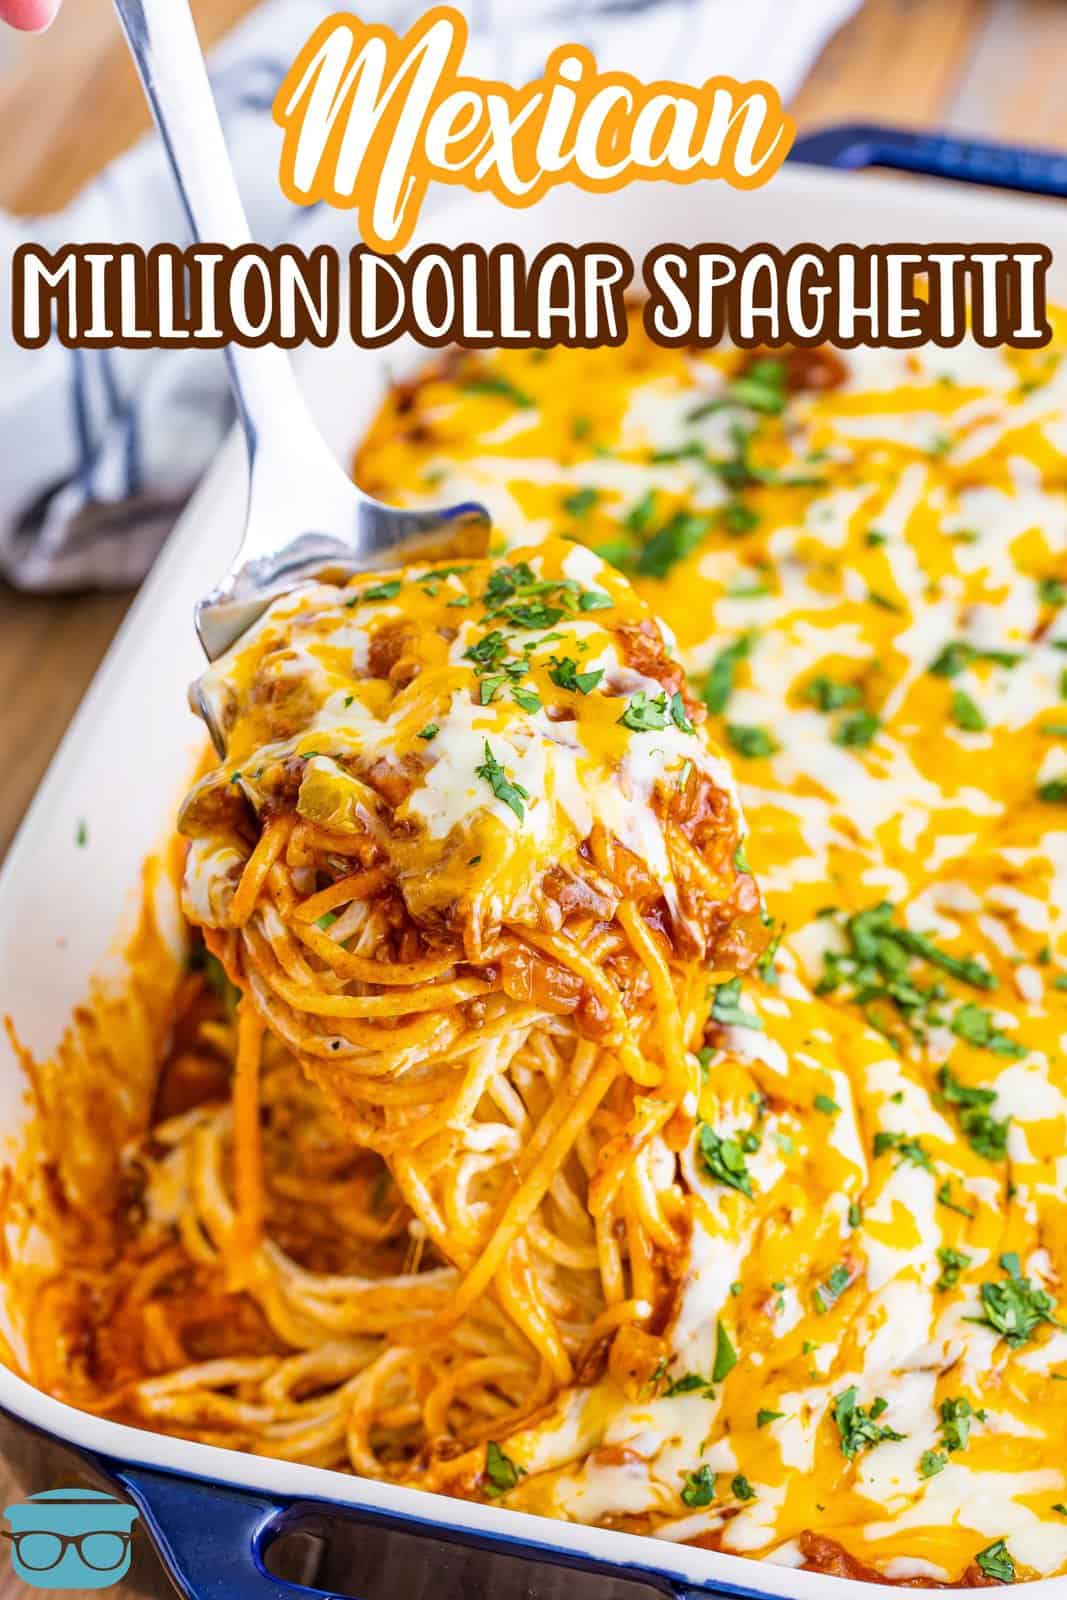 Serving utensil holding a serving of Mexican million dollar spaghetti over a baking dish.